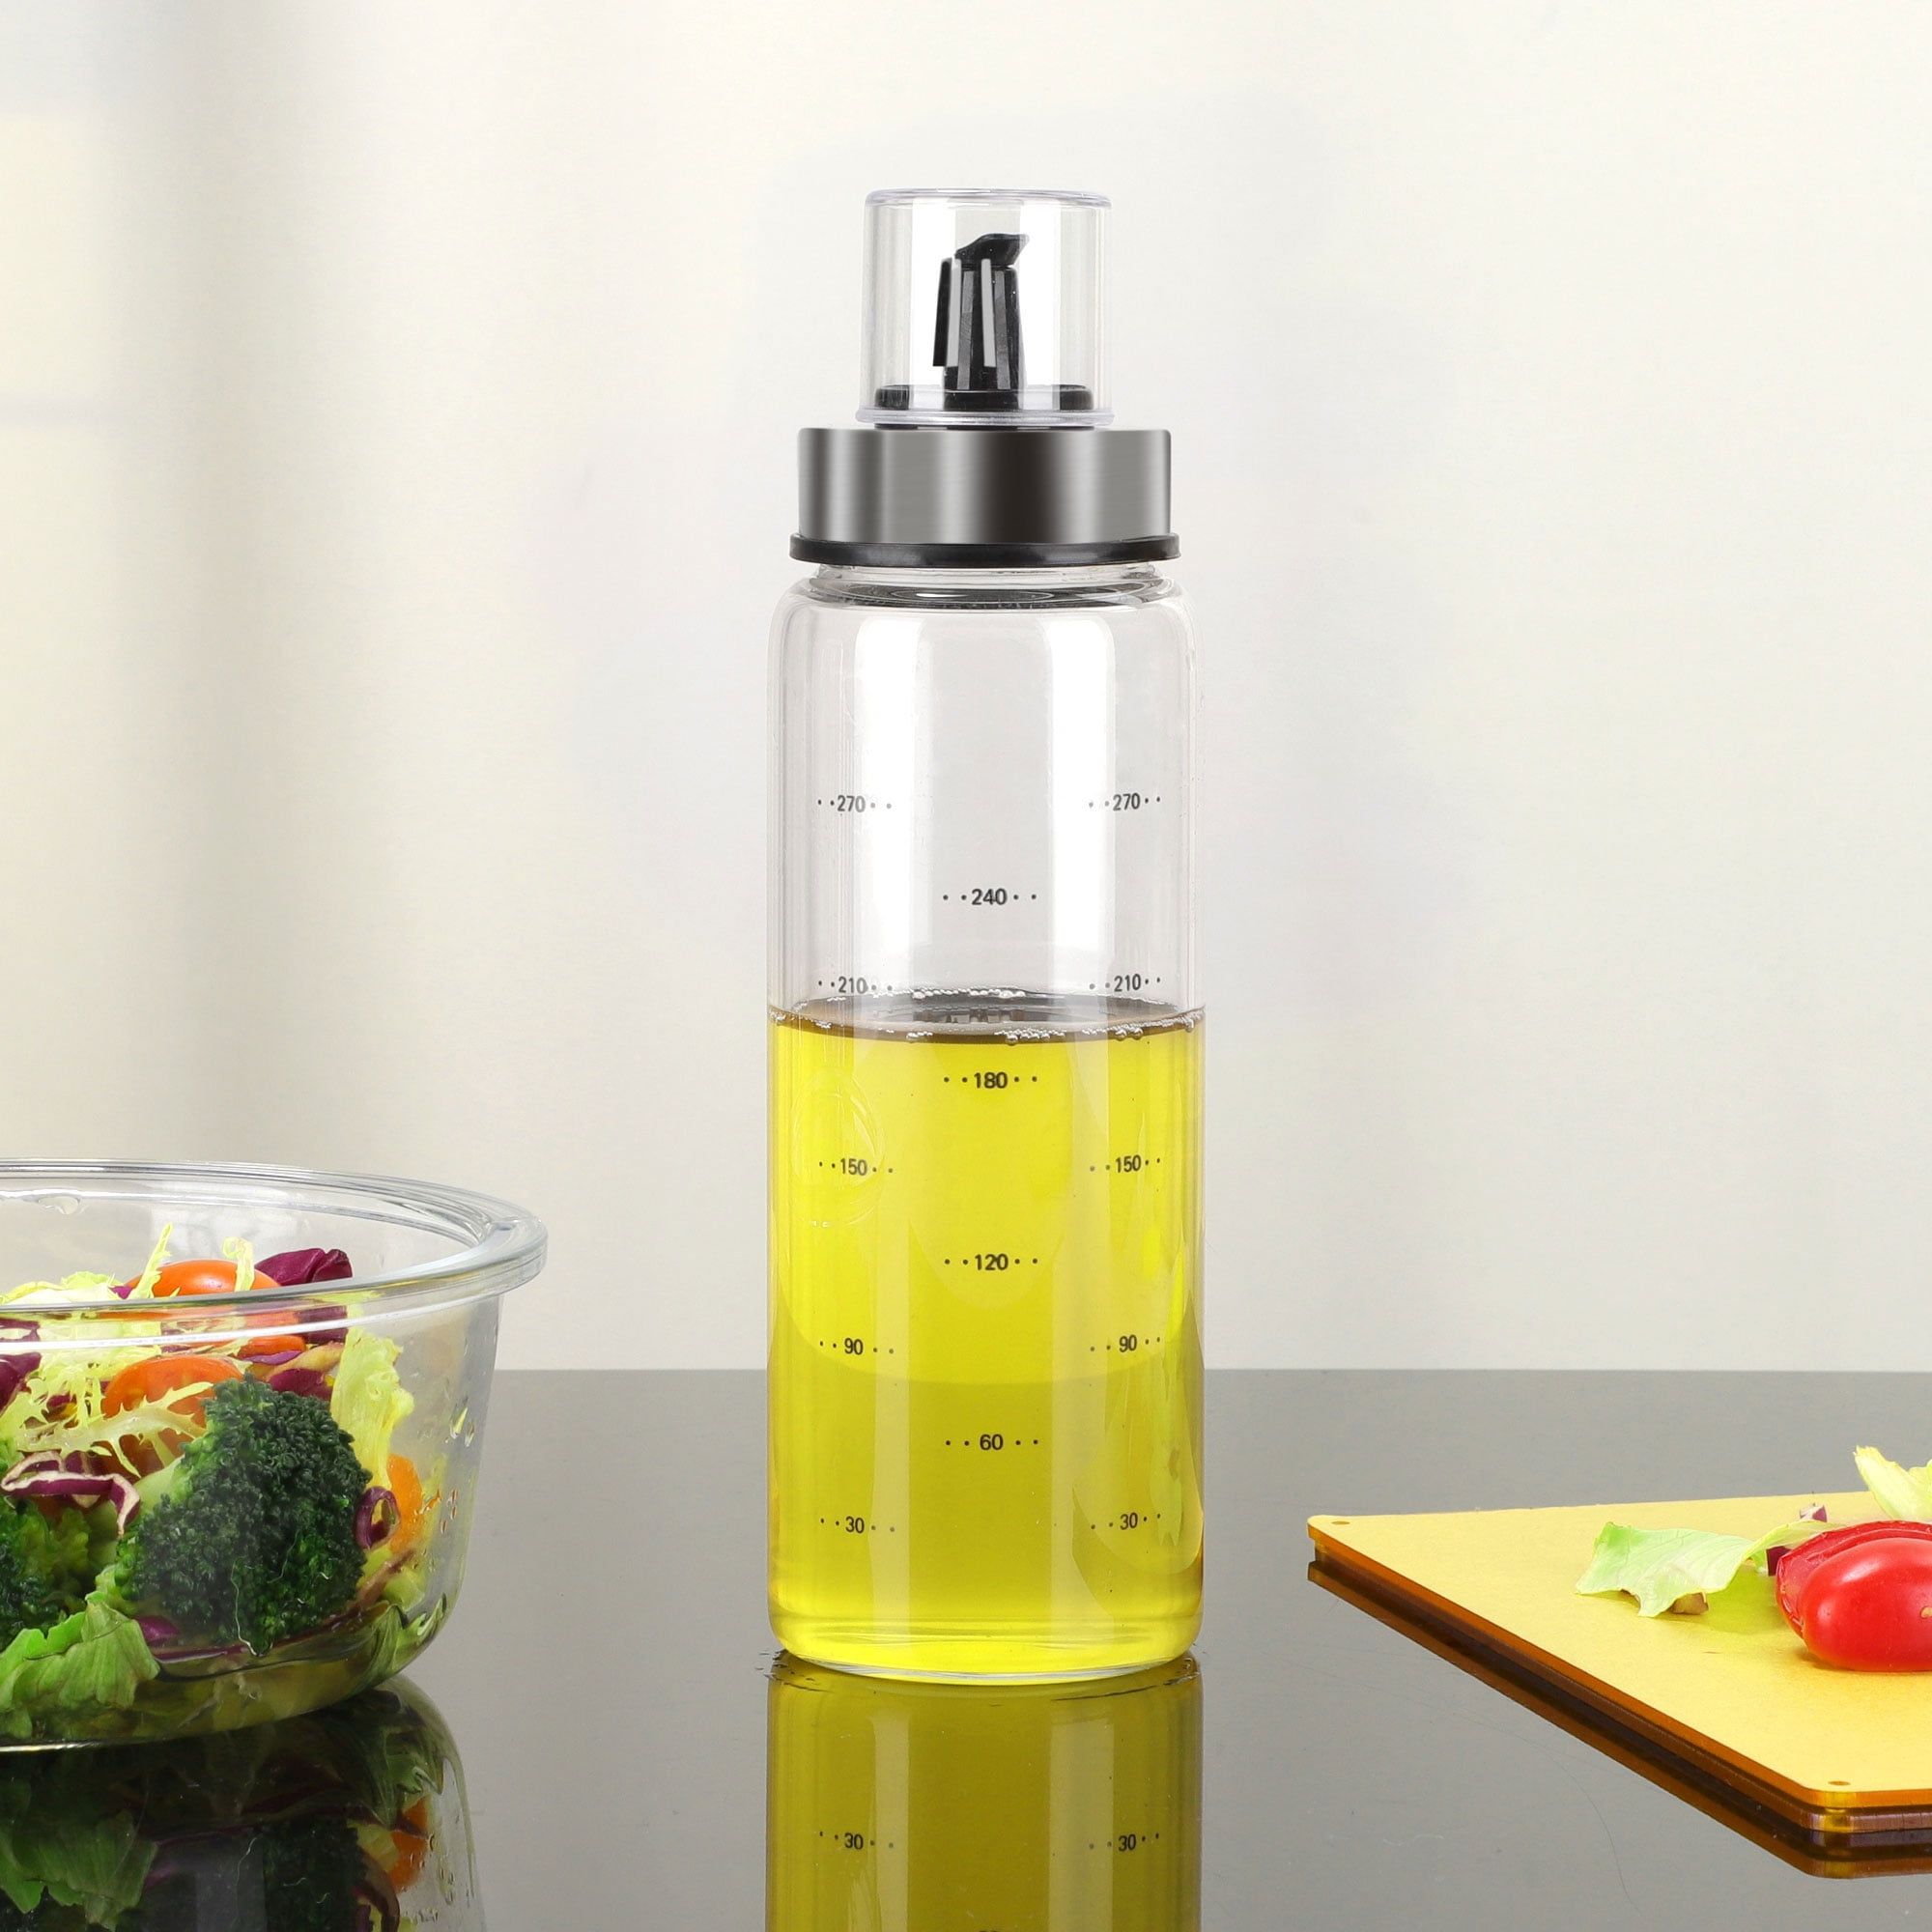 Zulay Kitchen Olive Oil Dispenser Bottle with Accessories - Green